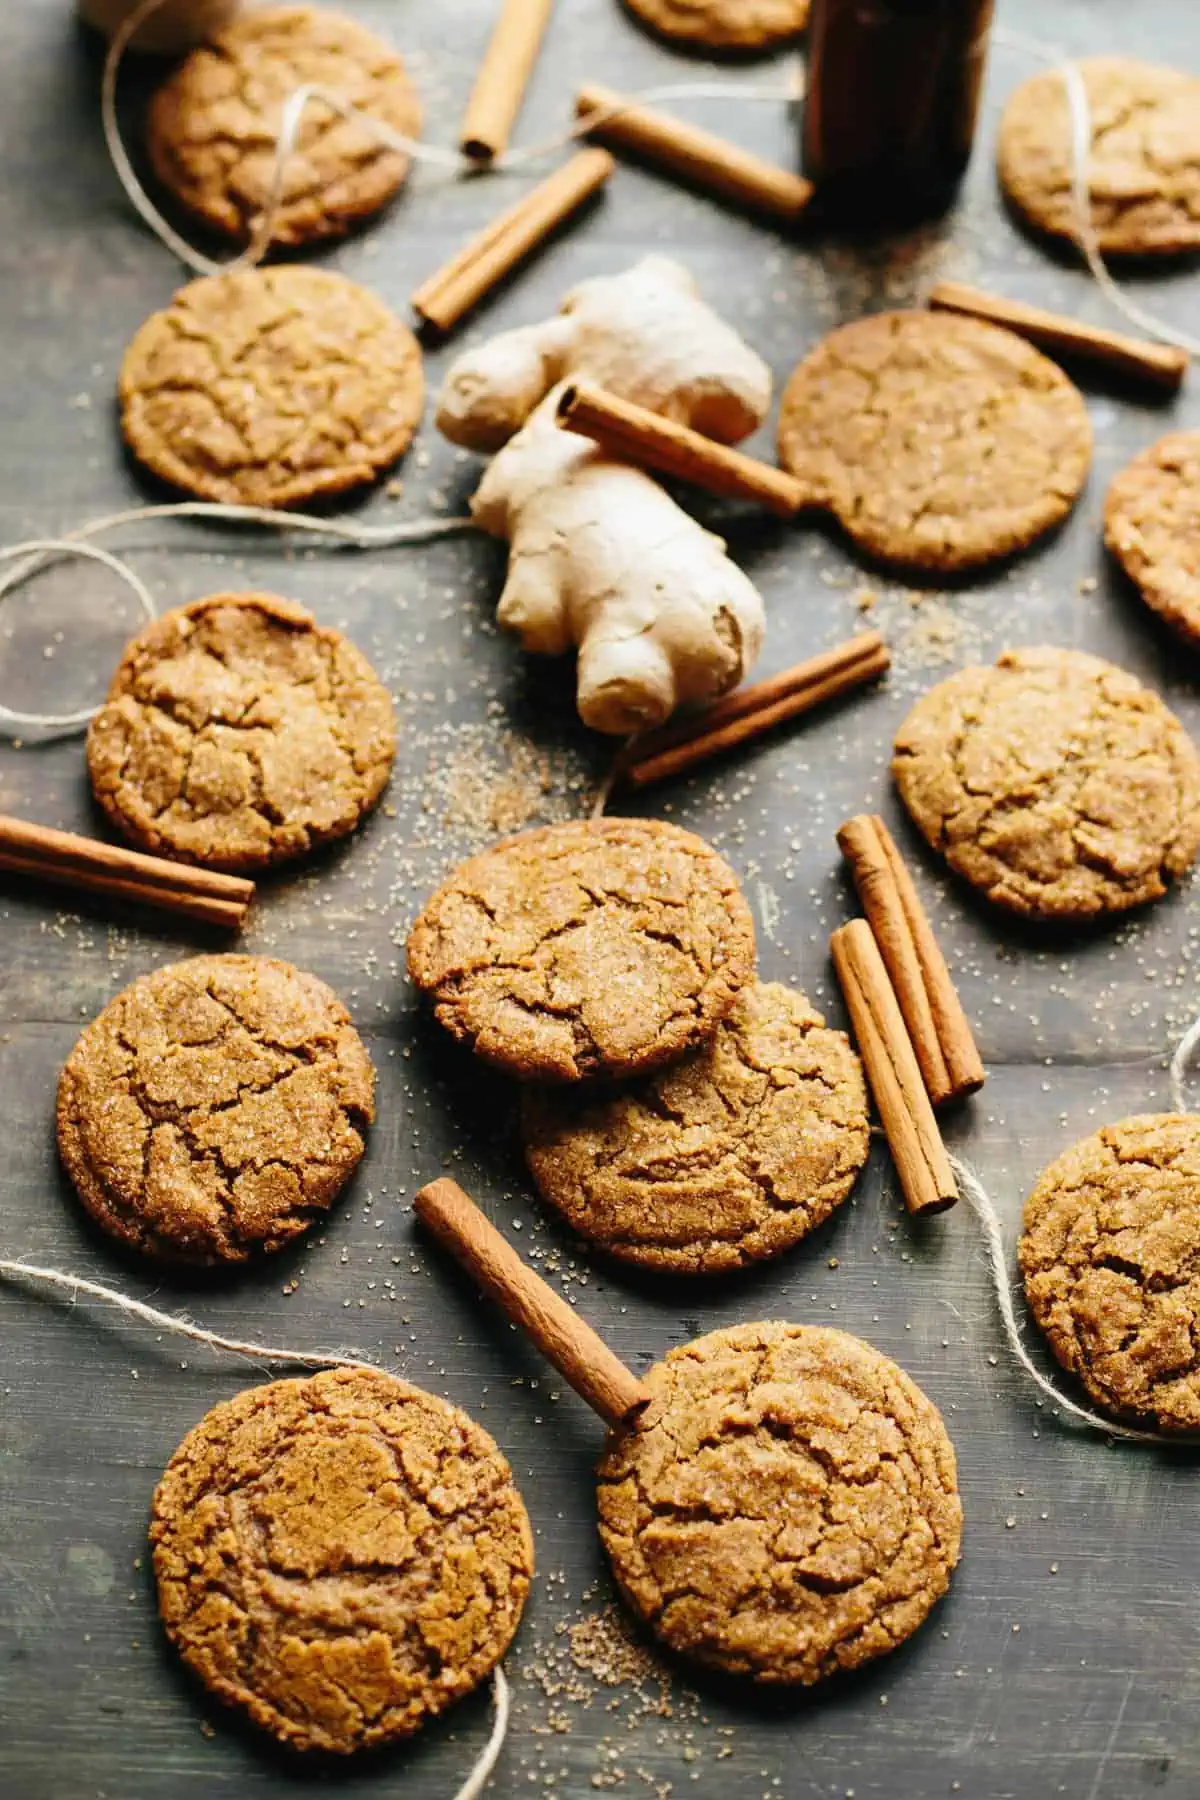 Several brown butter ginger molasses cookies spread out on a table.